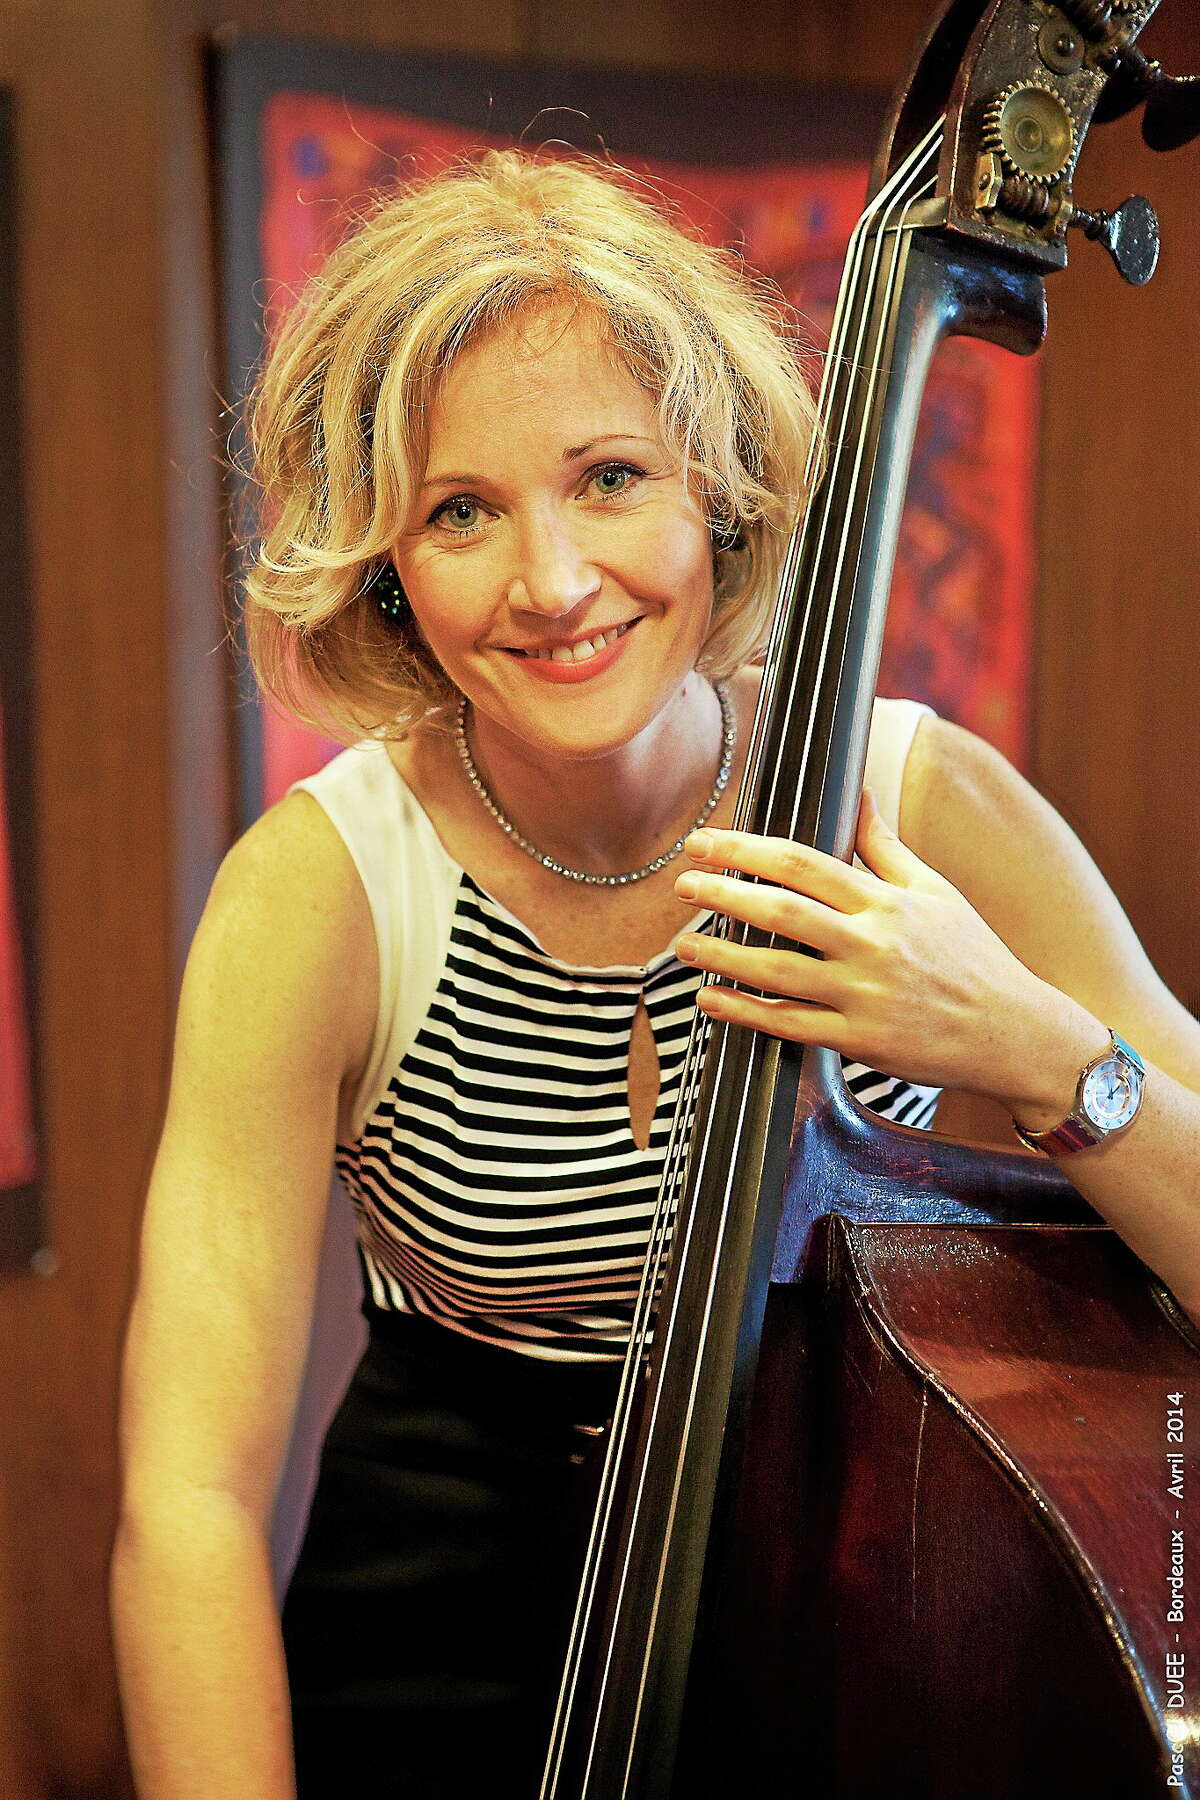 Photos courtesy of Litchfield Jazz Festival Bassist Nicki Parrott is joining the Litchfield Jazz Camp this year.